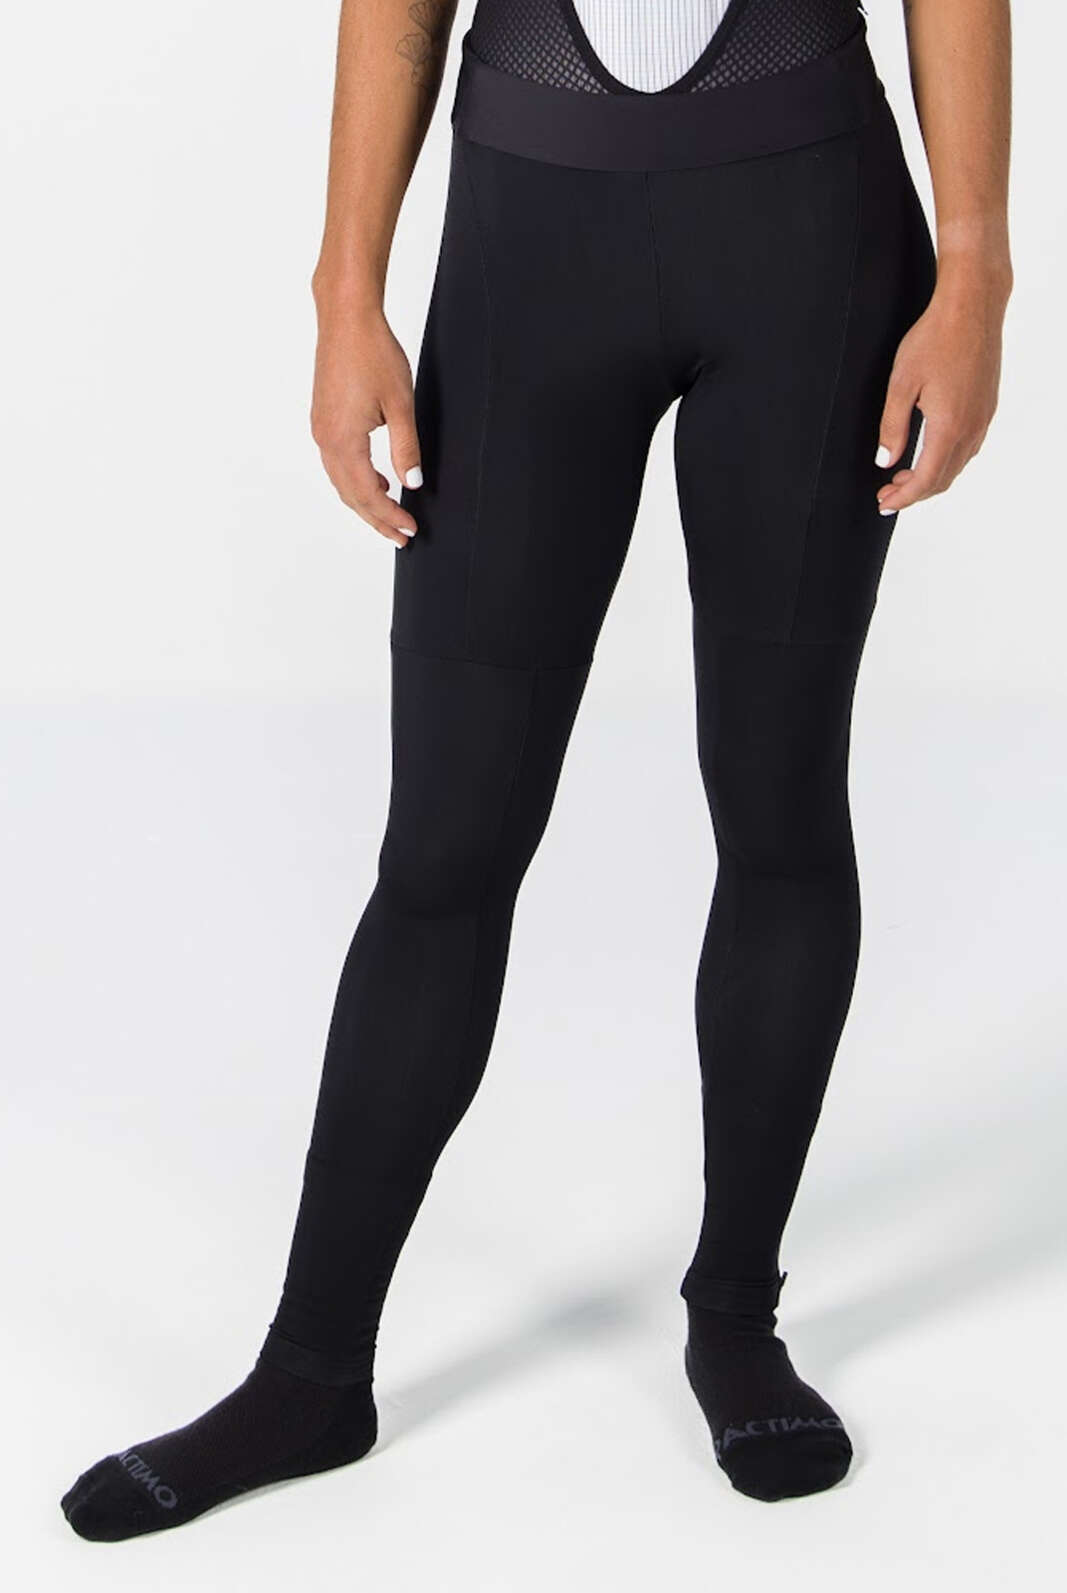 Women\'s Thermal Cycling Tights | Cool & Cold Weather | Pactimo